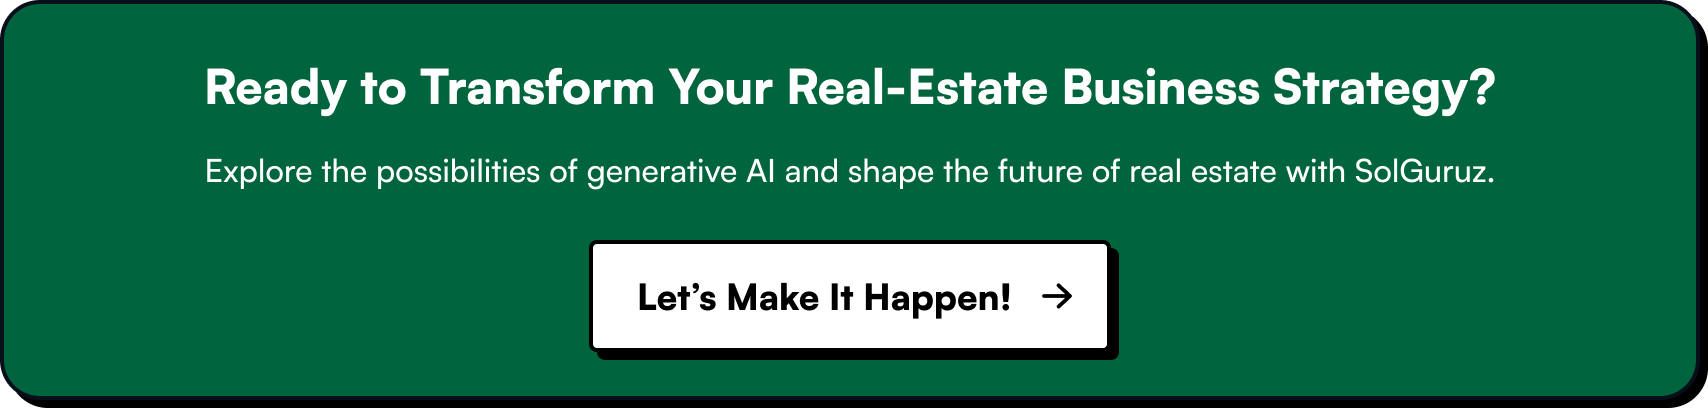 Ready to Transform Your Real-Estate Business Strategy